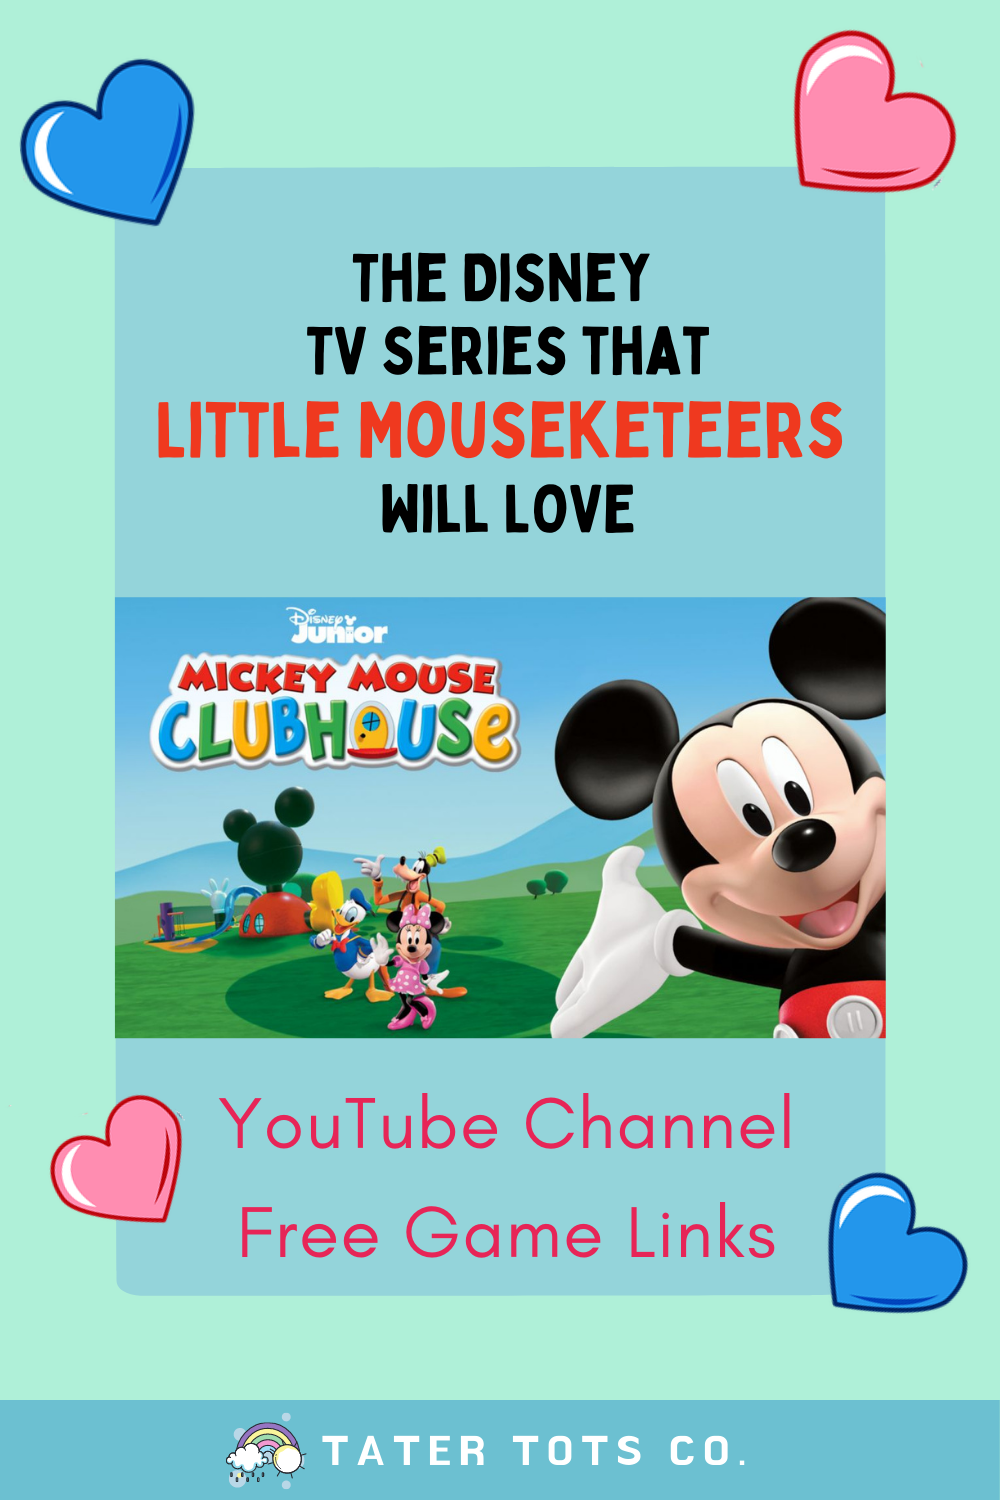 Disney Junior's Mickey Mouse Clubhouse {TV Show, Review} - Maple Leaf Mommy